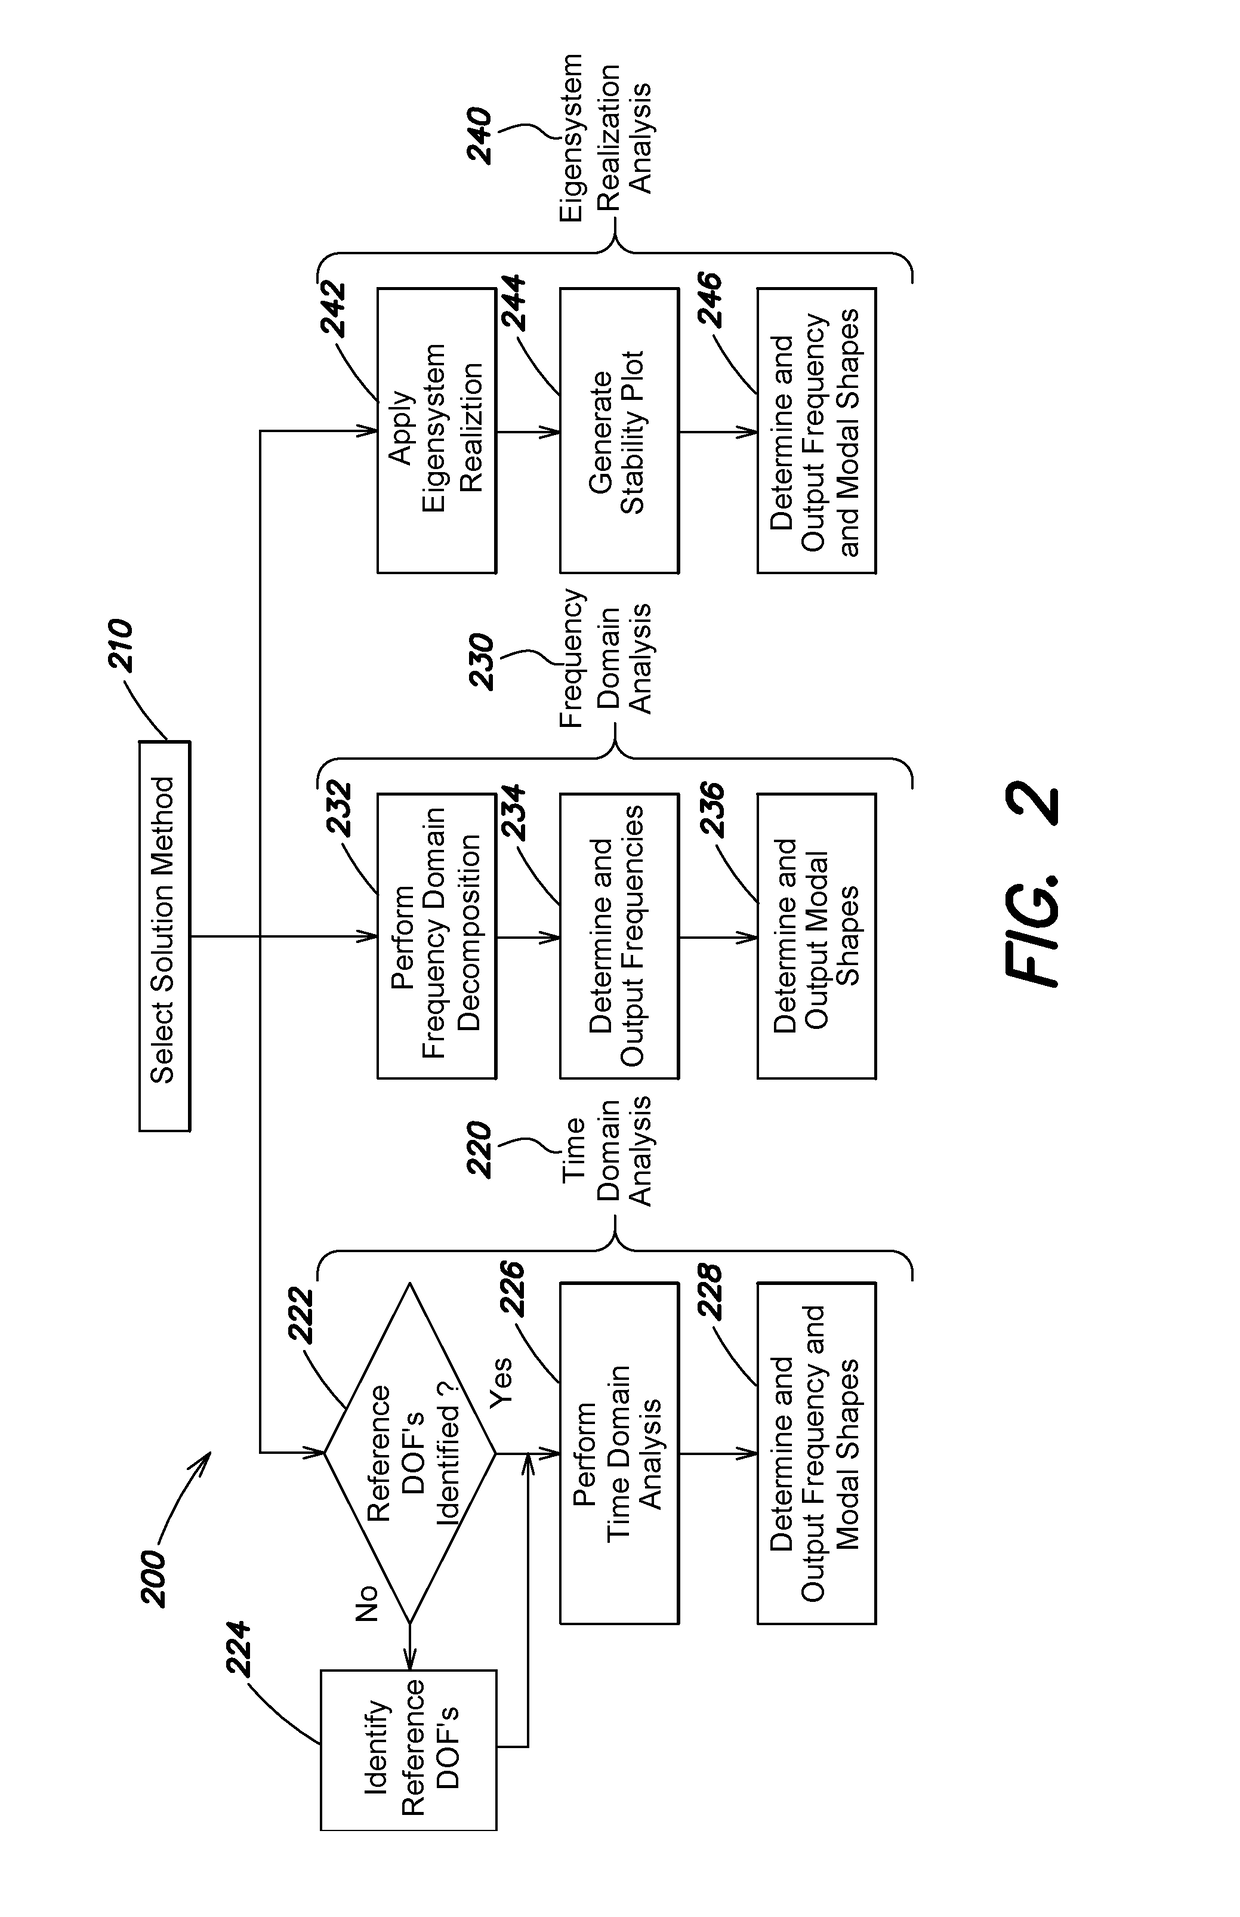 Software system for dynamic feature extraction for structural health monitoring